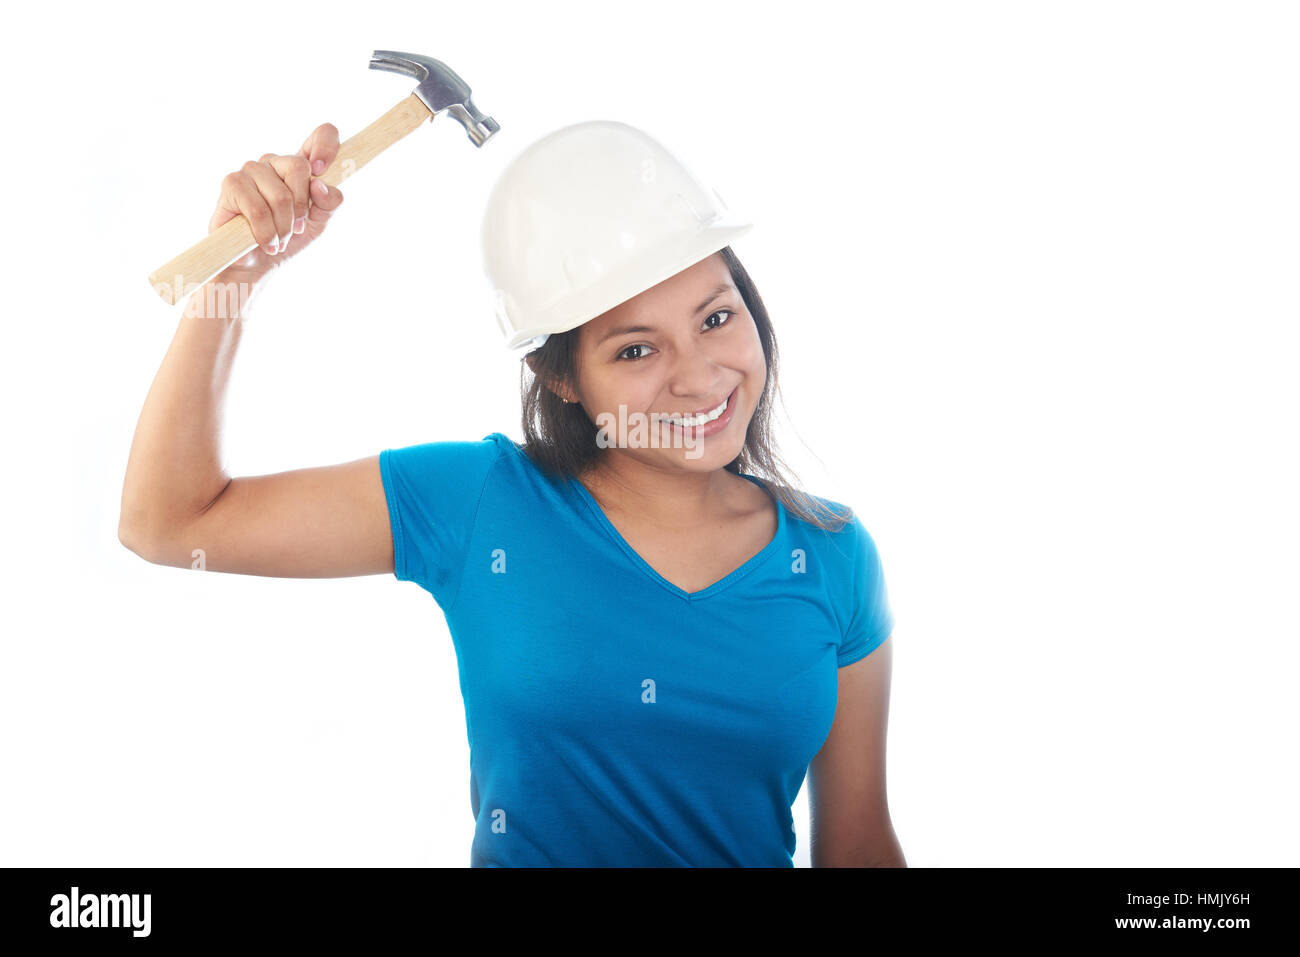 girl hitting her helmet with a hammer Stock Photo